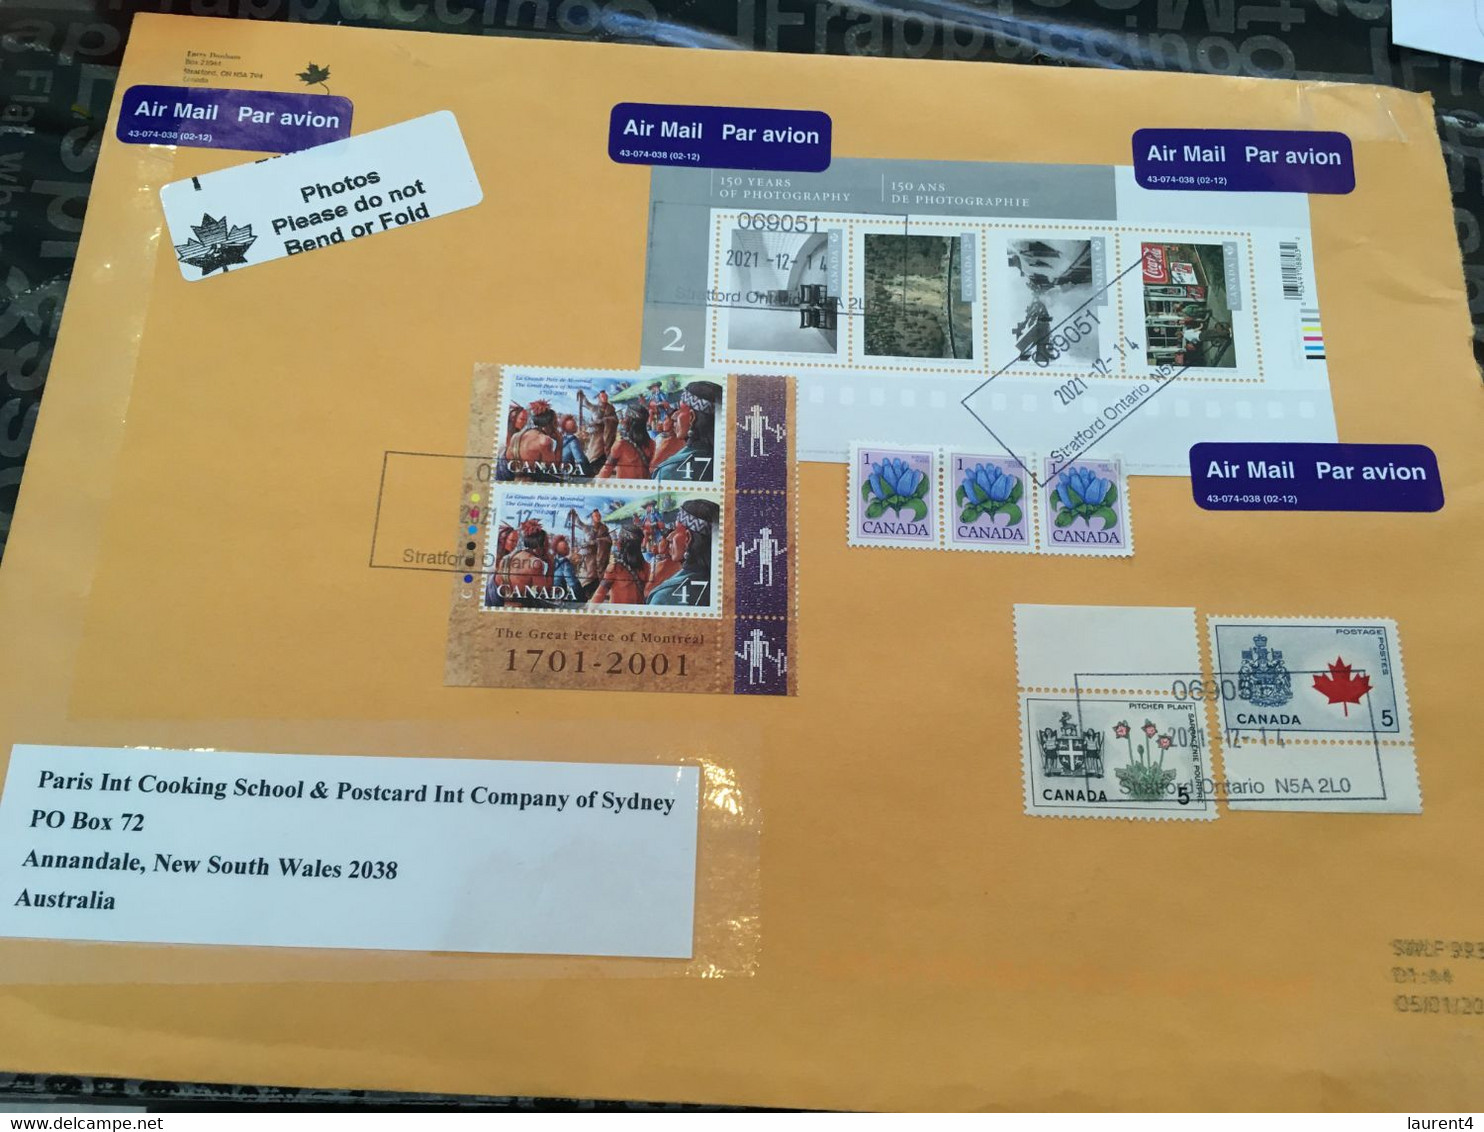 (2 F 39) LARGE Letter Posted From Canada To Australia During COVID-19 Pandemic - 2 Covers (30 X 23 Cm) - Covers & Documents